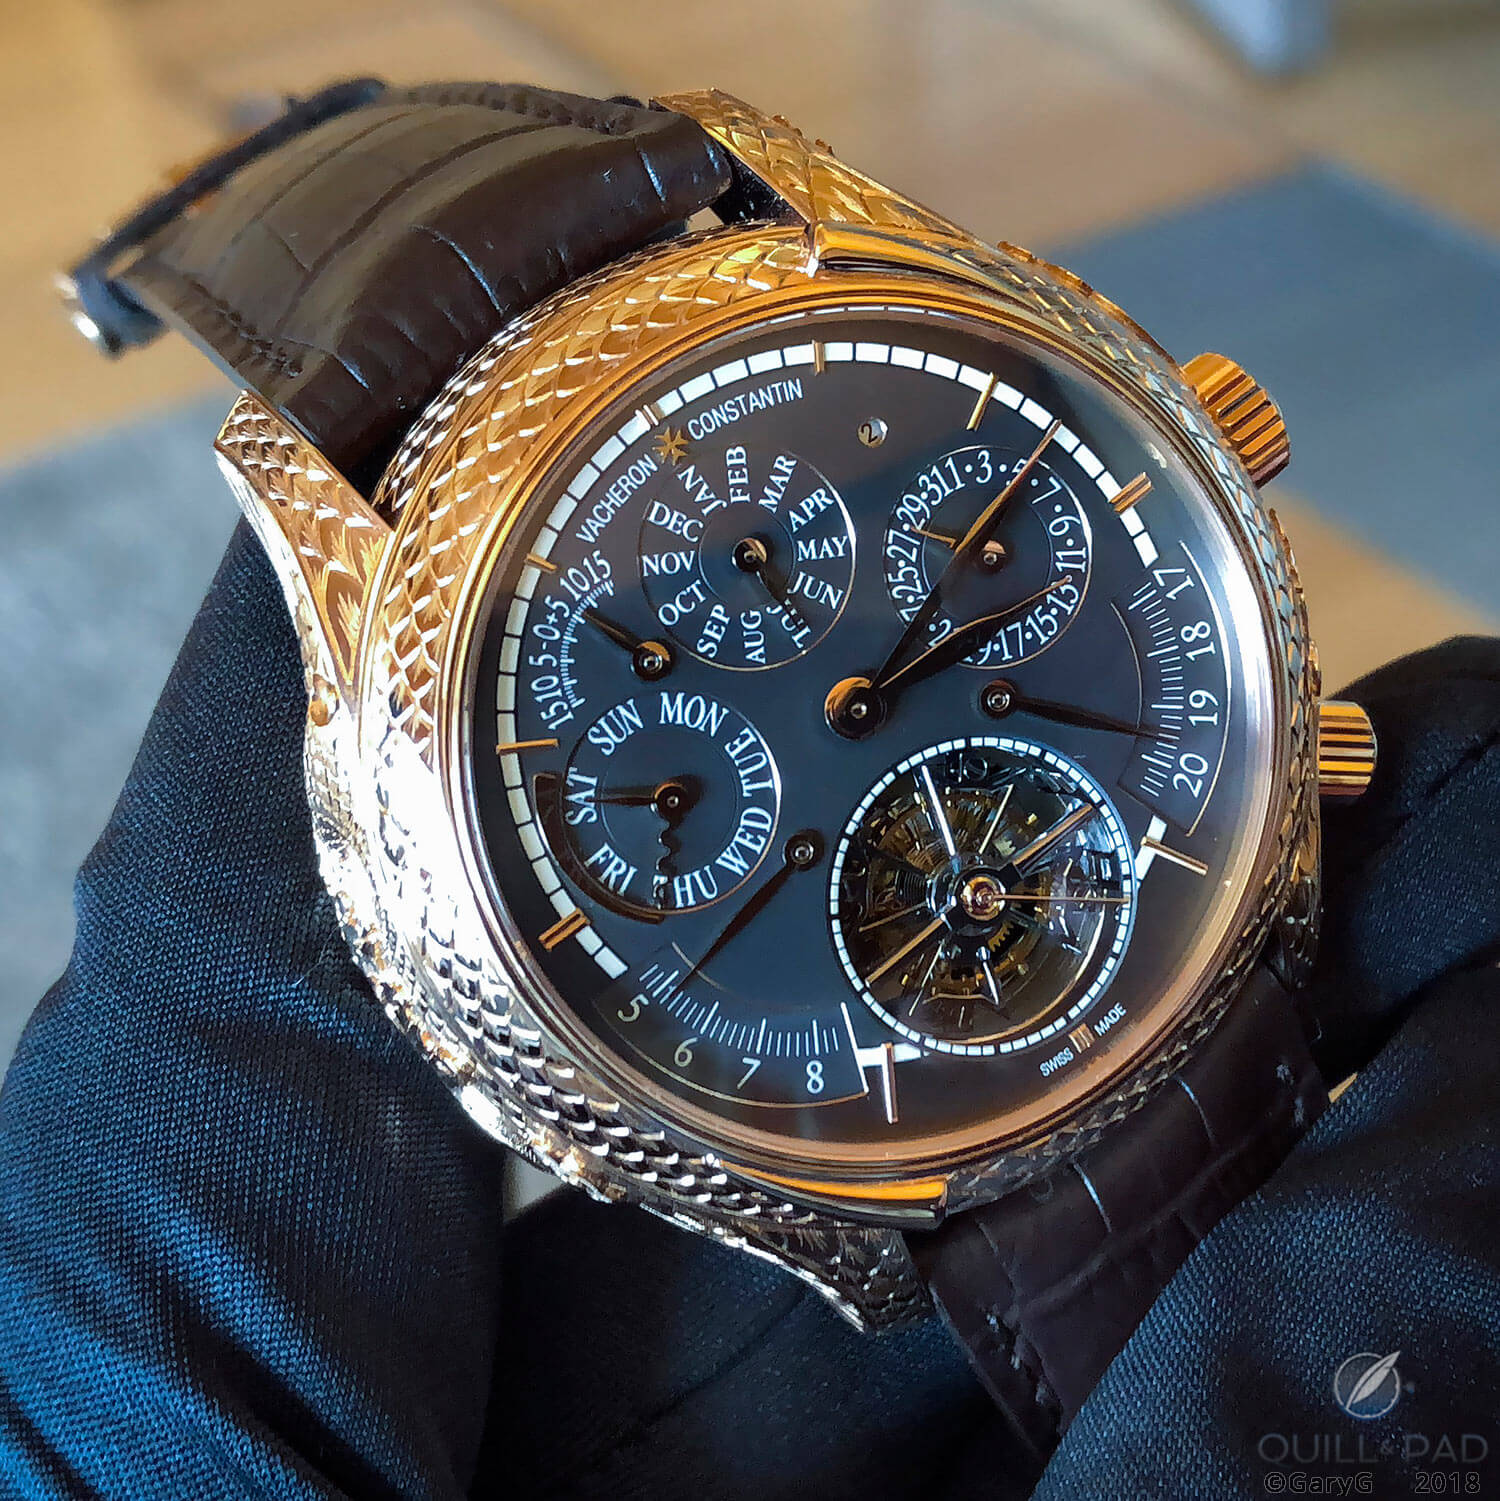 Feeling grand: Vacheron Constantin’s unique Grand Complication Phoenix with perpetual calendar, equation of time, and sunrise and sunset indications